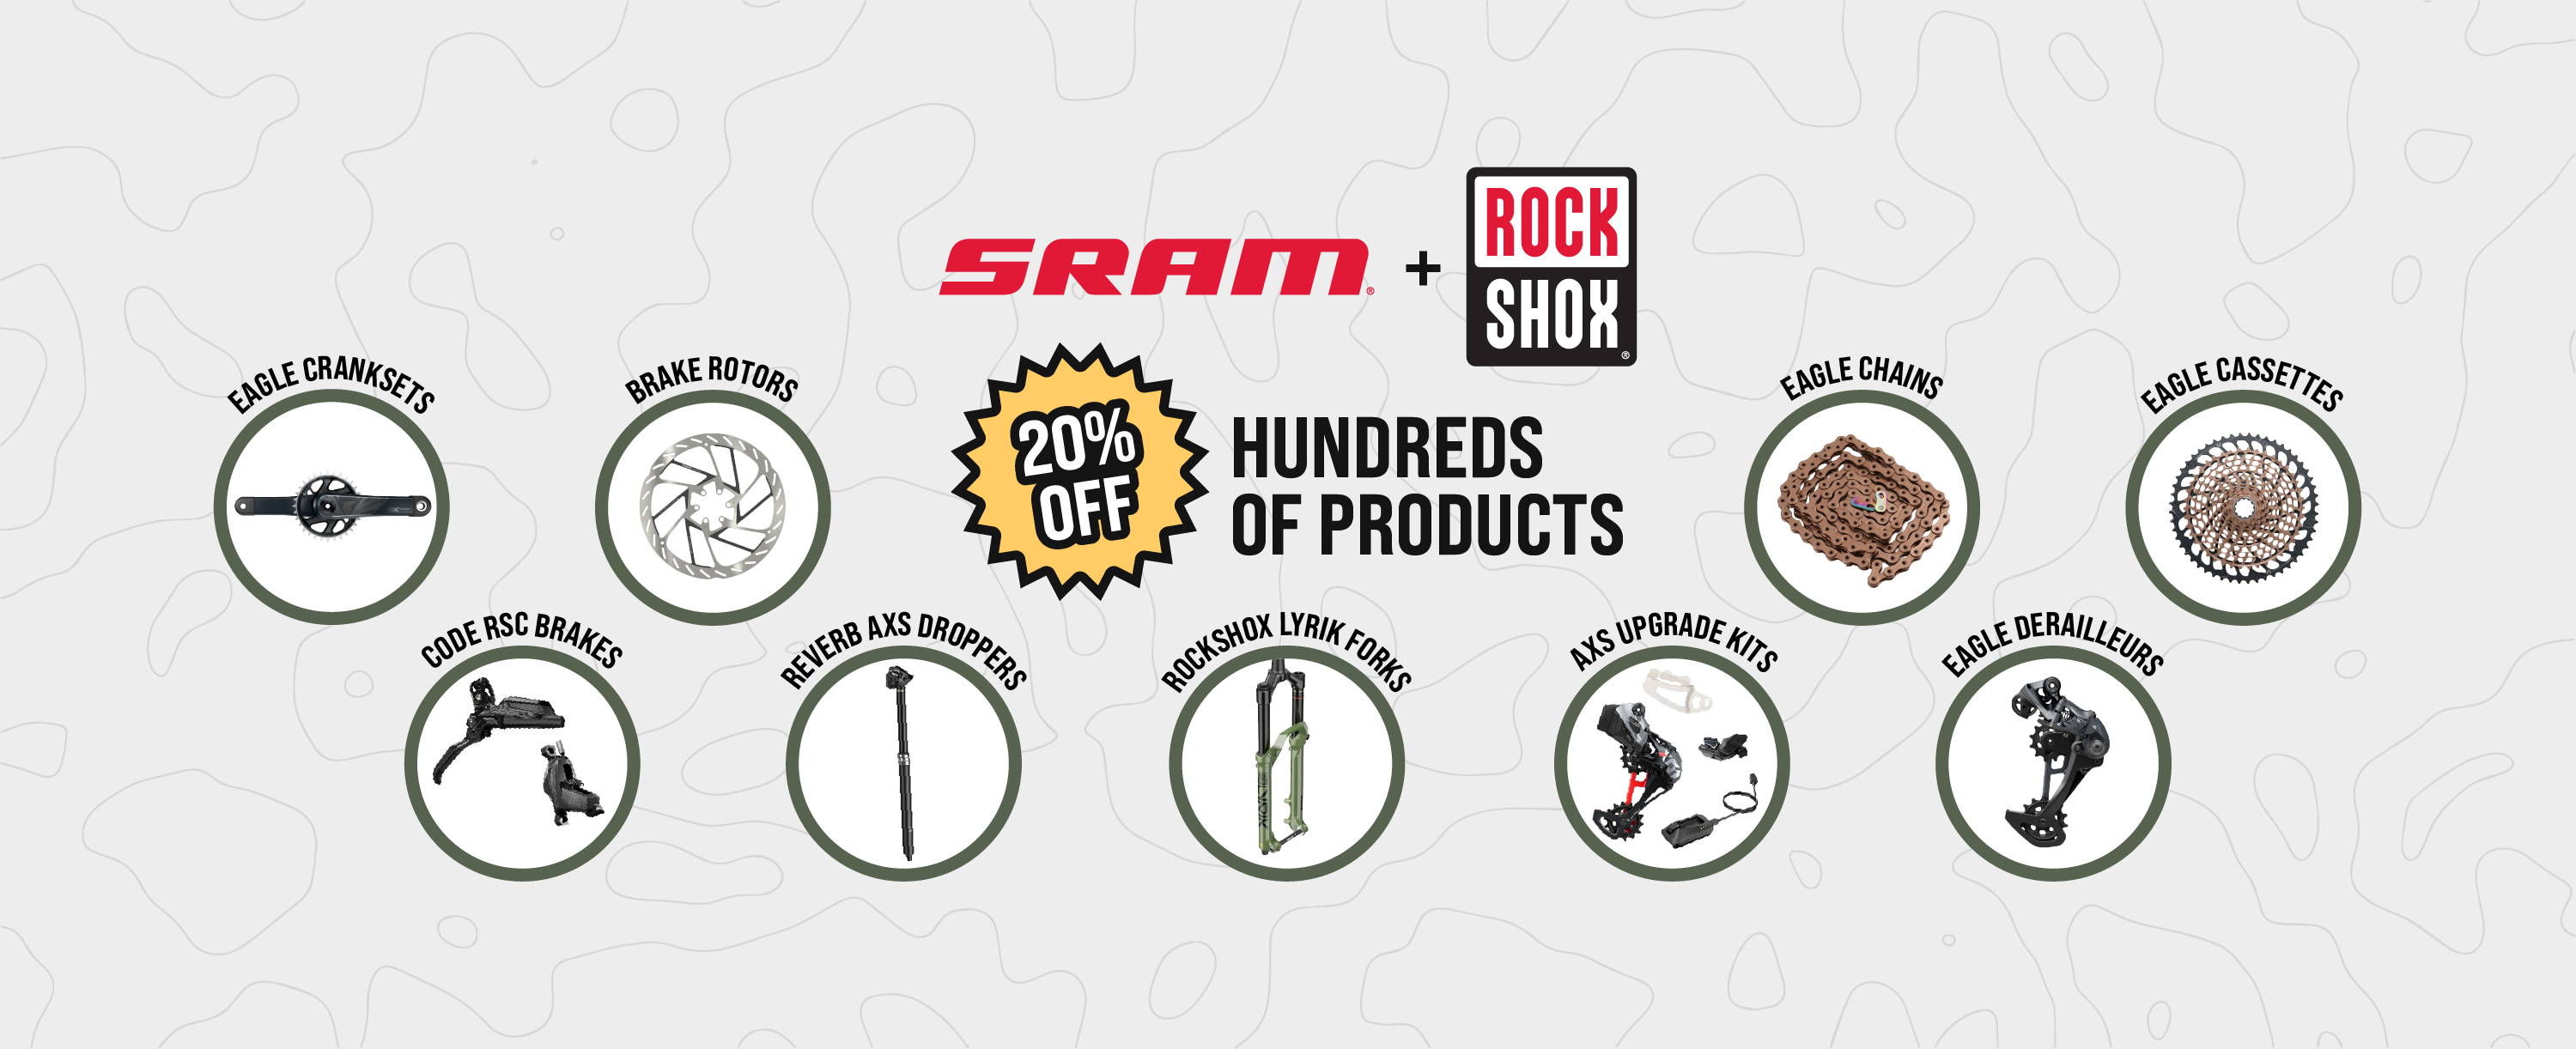 sram and rockshox black friday sale banner showing 20% off discount